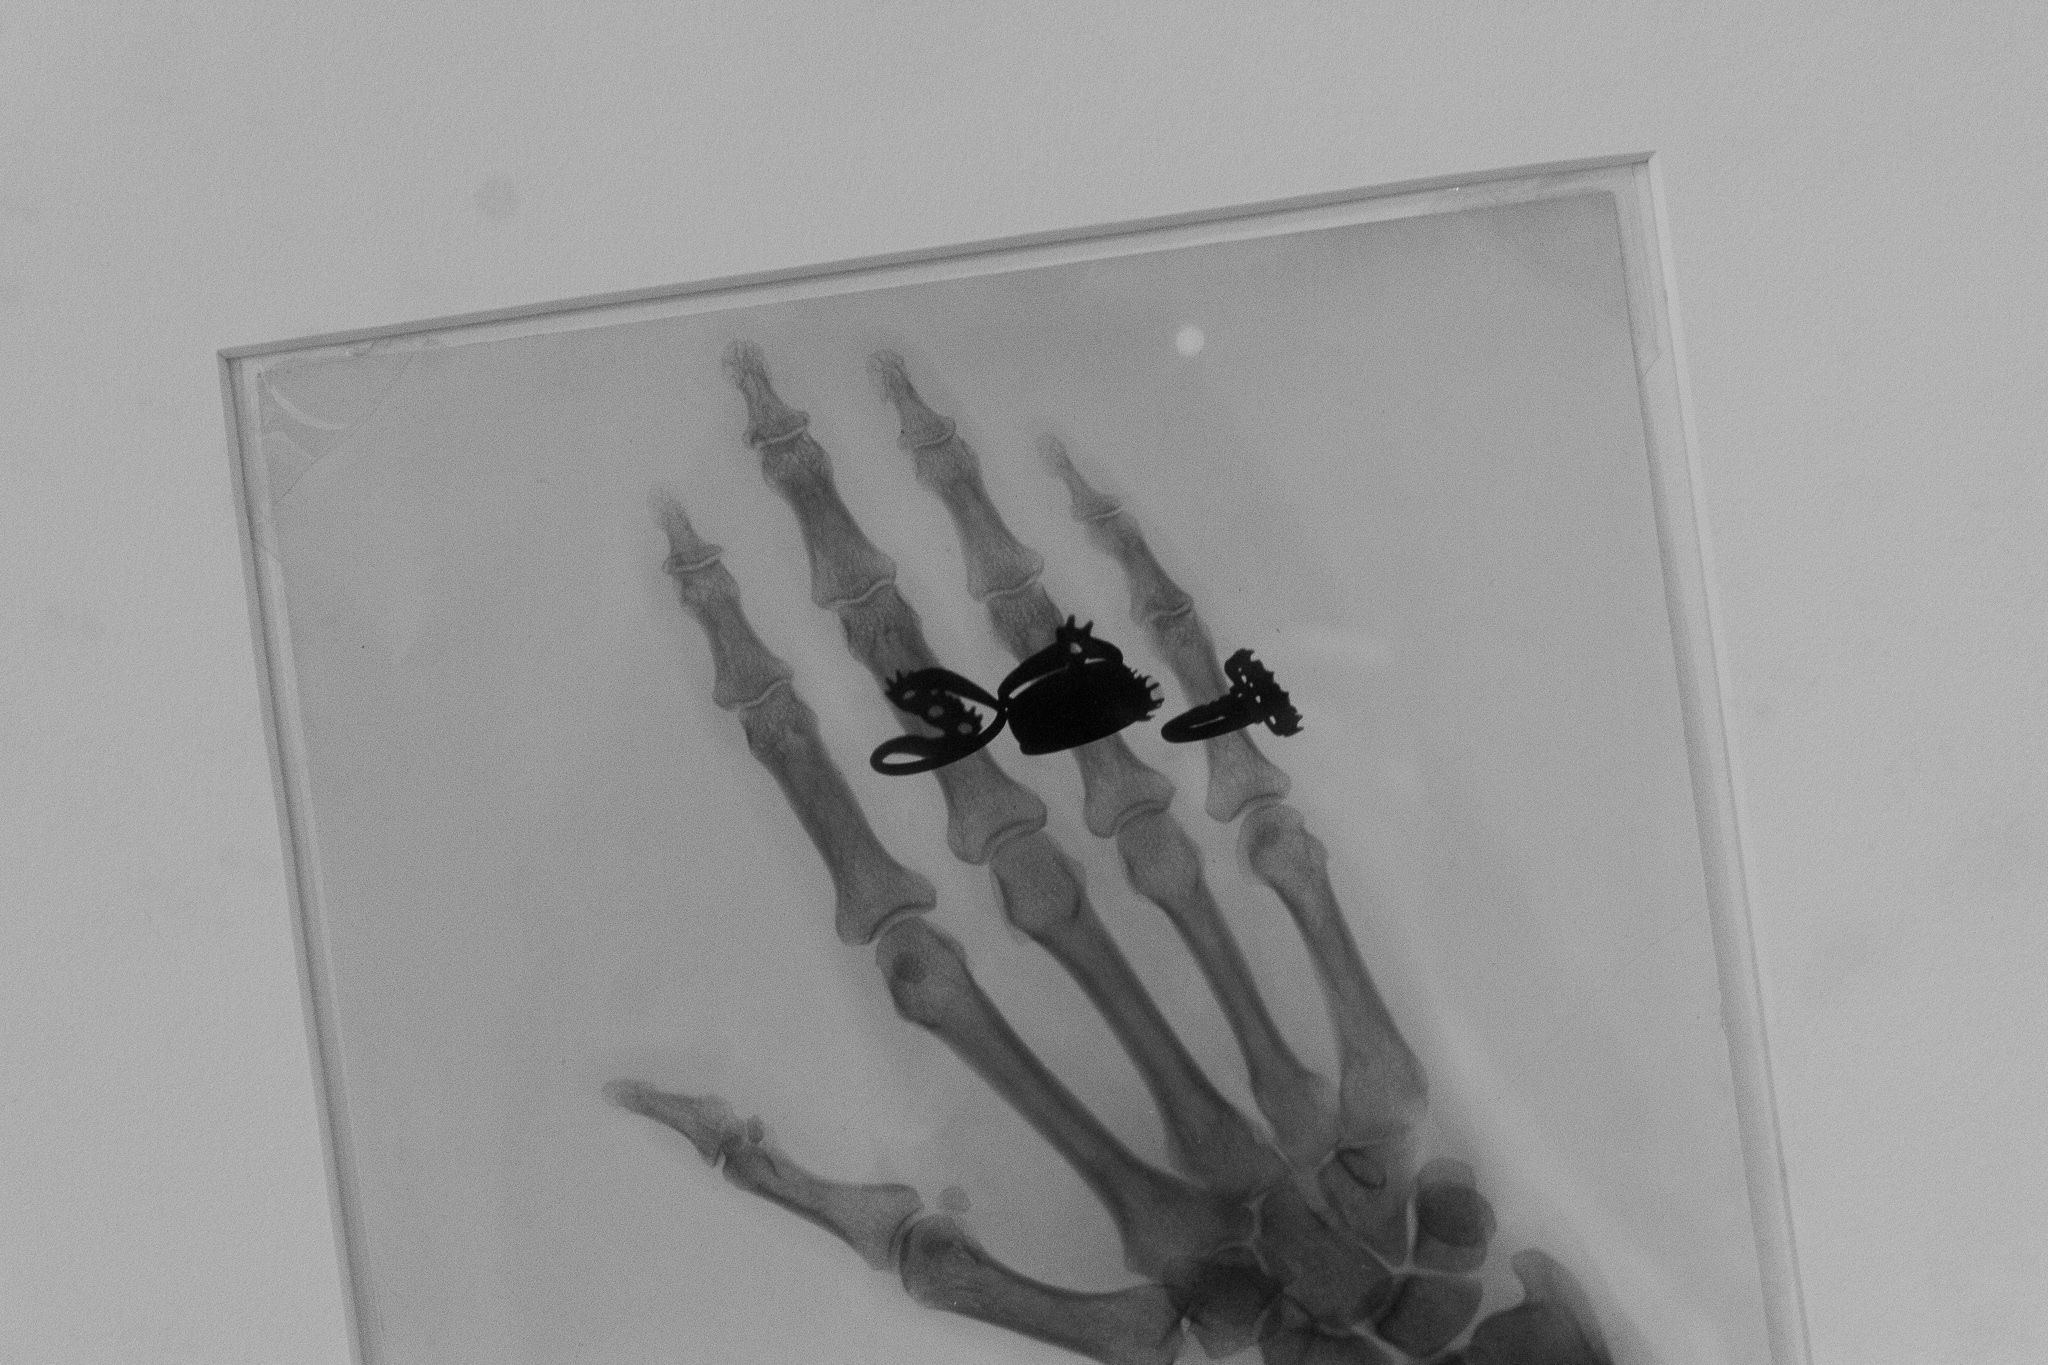 X-ray image of a human hand with rings on the fingers